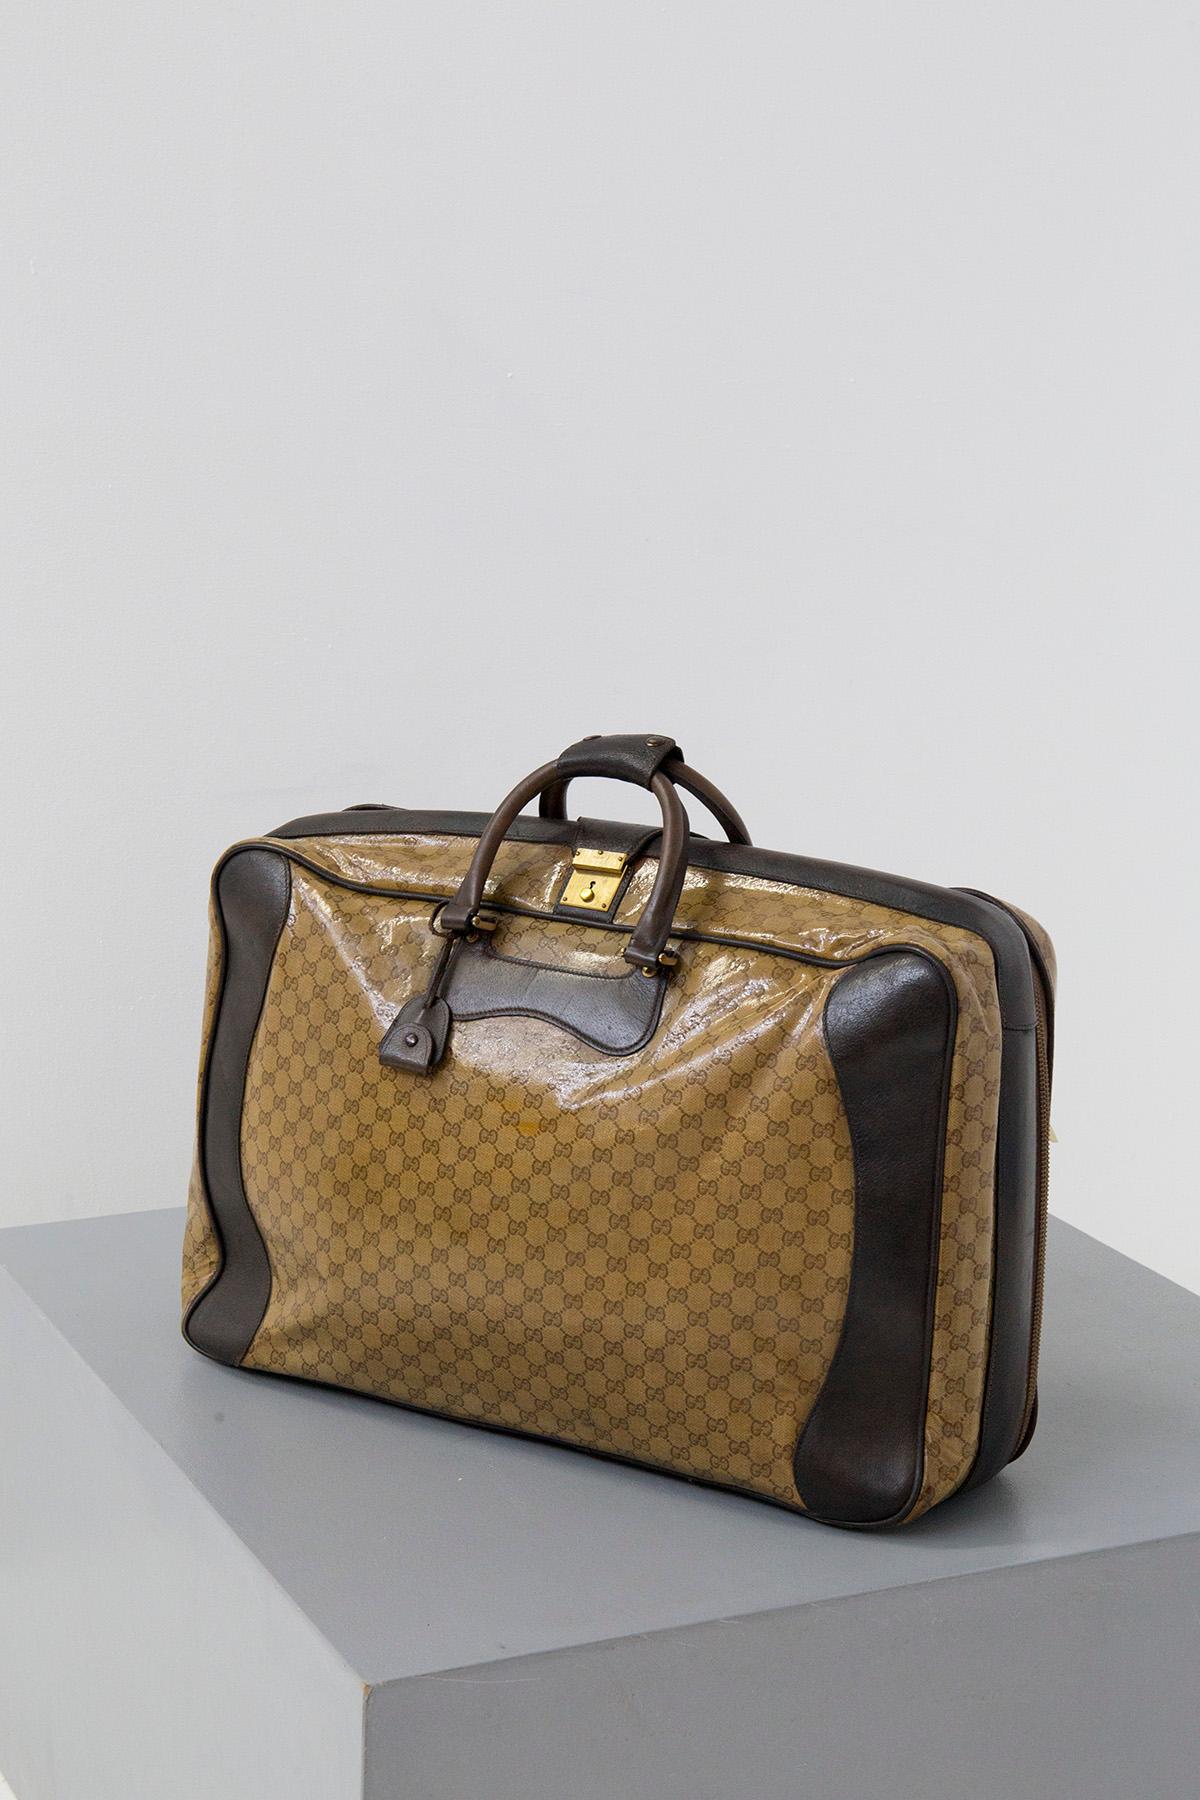 Elegant Gucci signature travel bag from the 1970s-80s vintage. Made with brown leather figir. The whole bag features its original logo in the very soft beige acetate leather. We notice two very elegant leather handles that allow the case to be